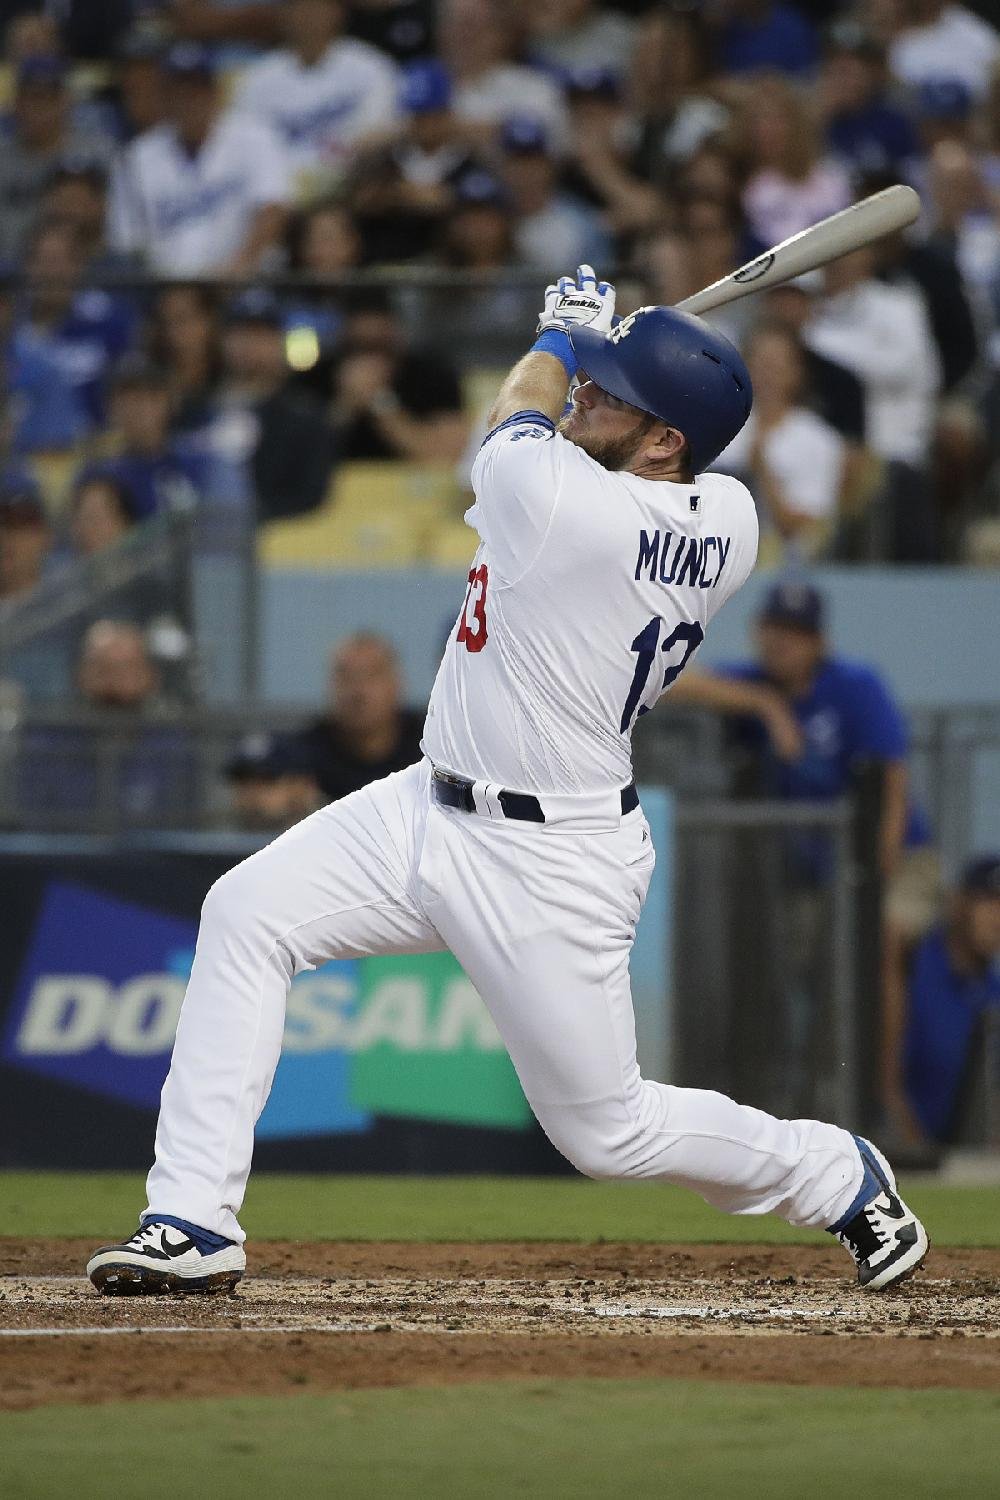 From castoff to playoffs: Max Muncy bashes for Los Angeles Dodgers